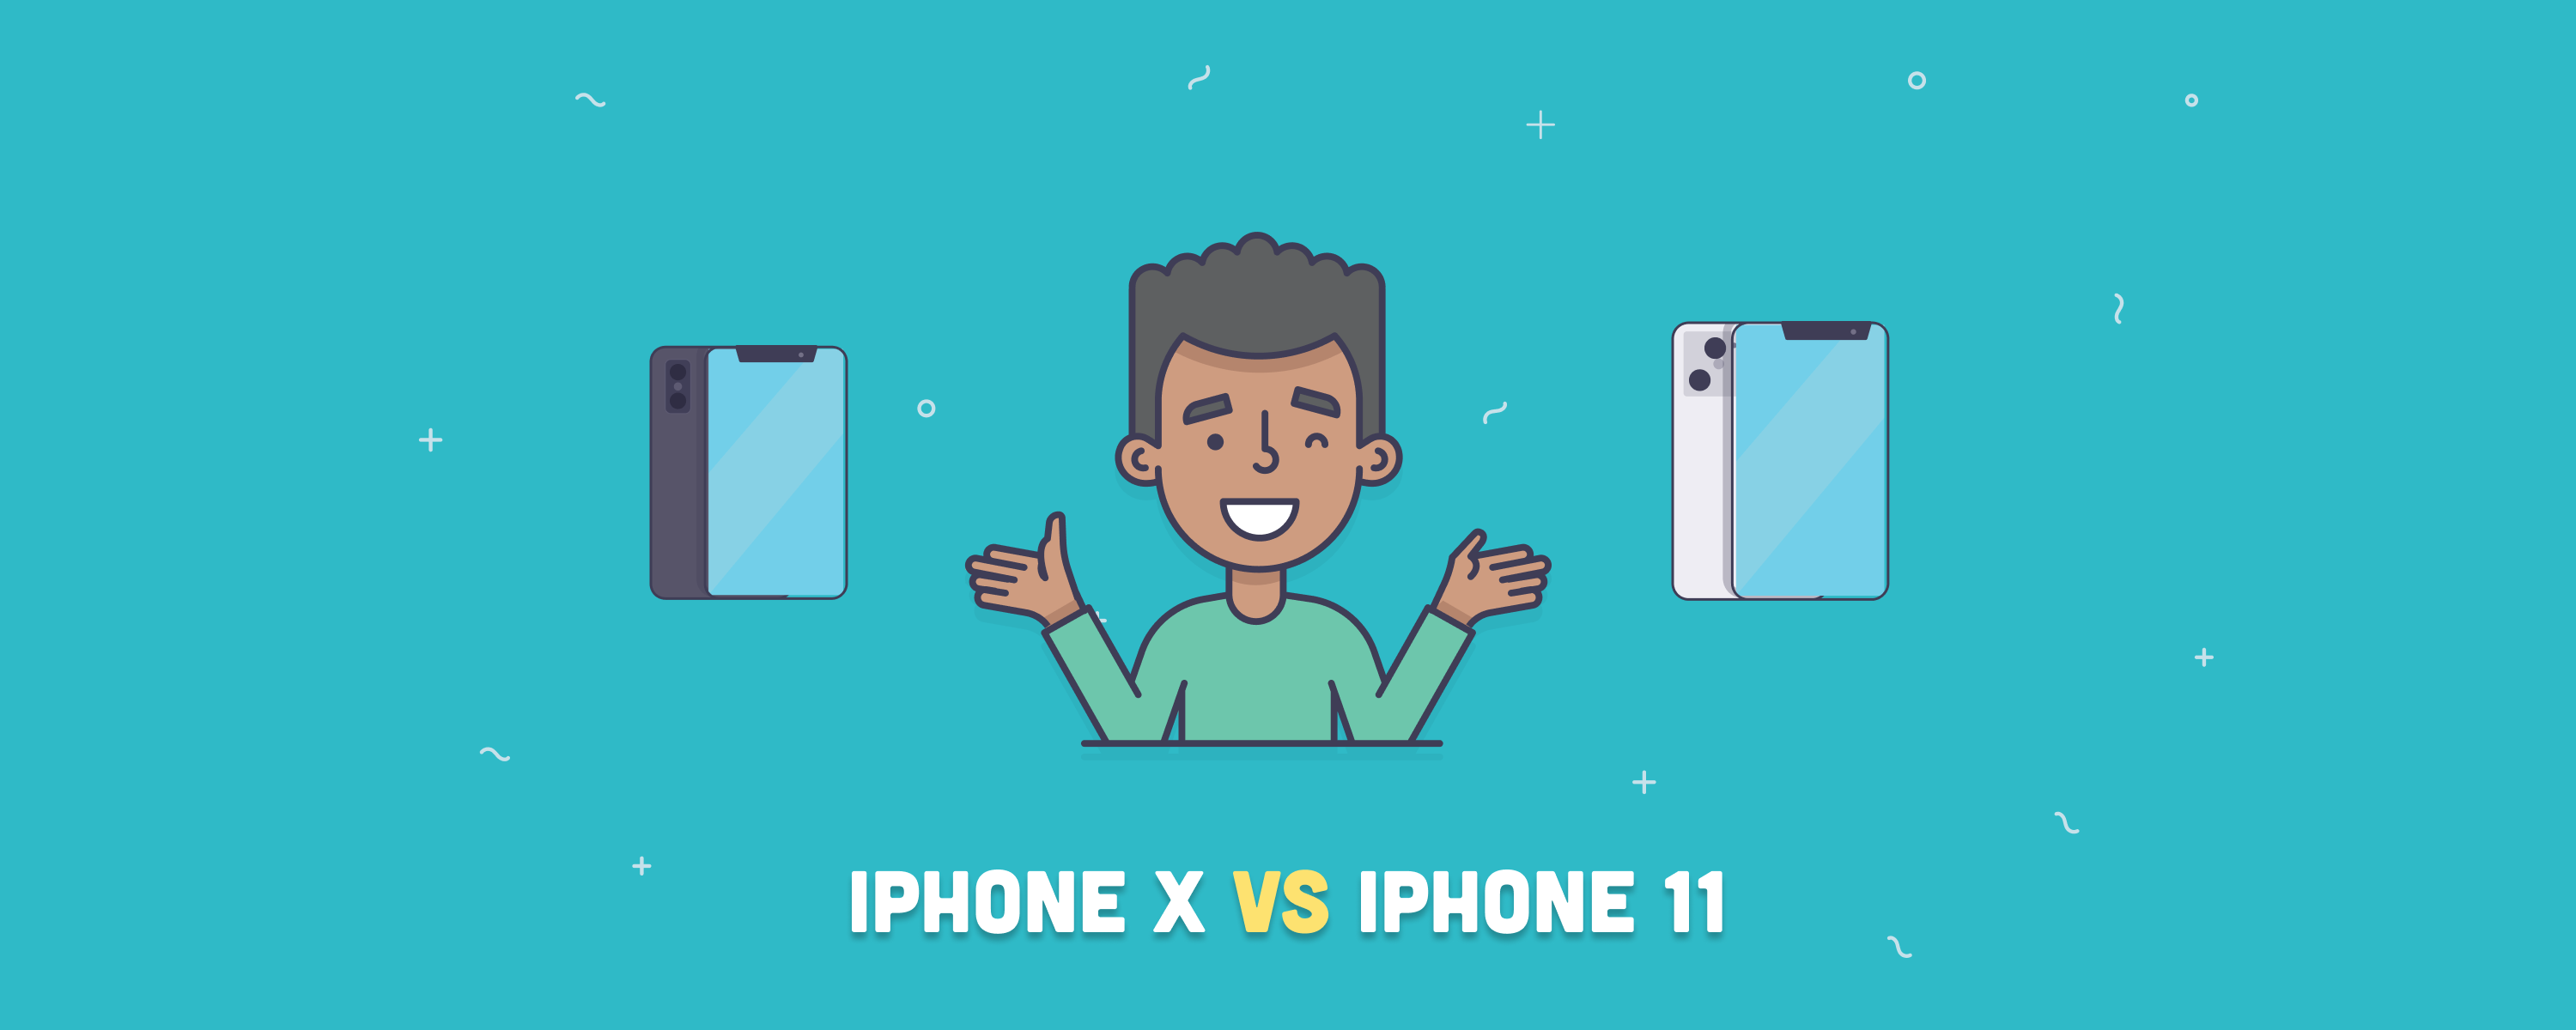 iPhone X vs. iPhone 11: What Are the Differences?